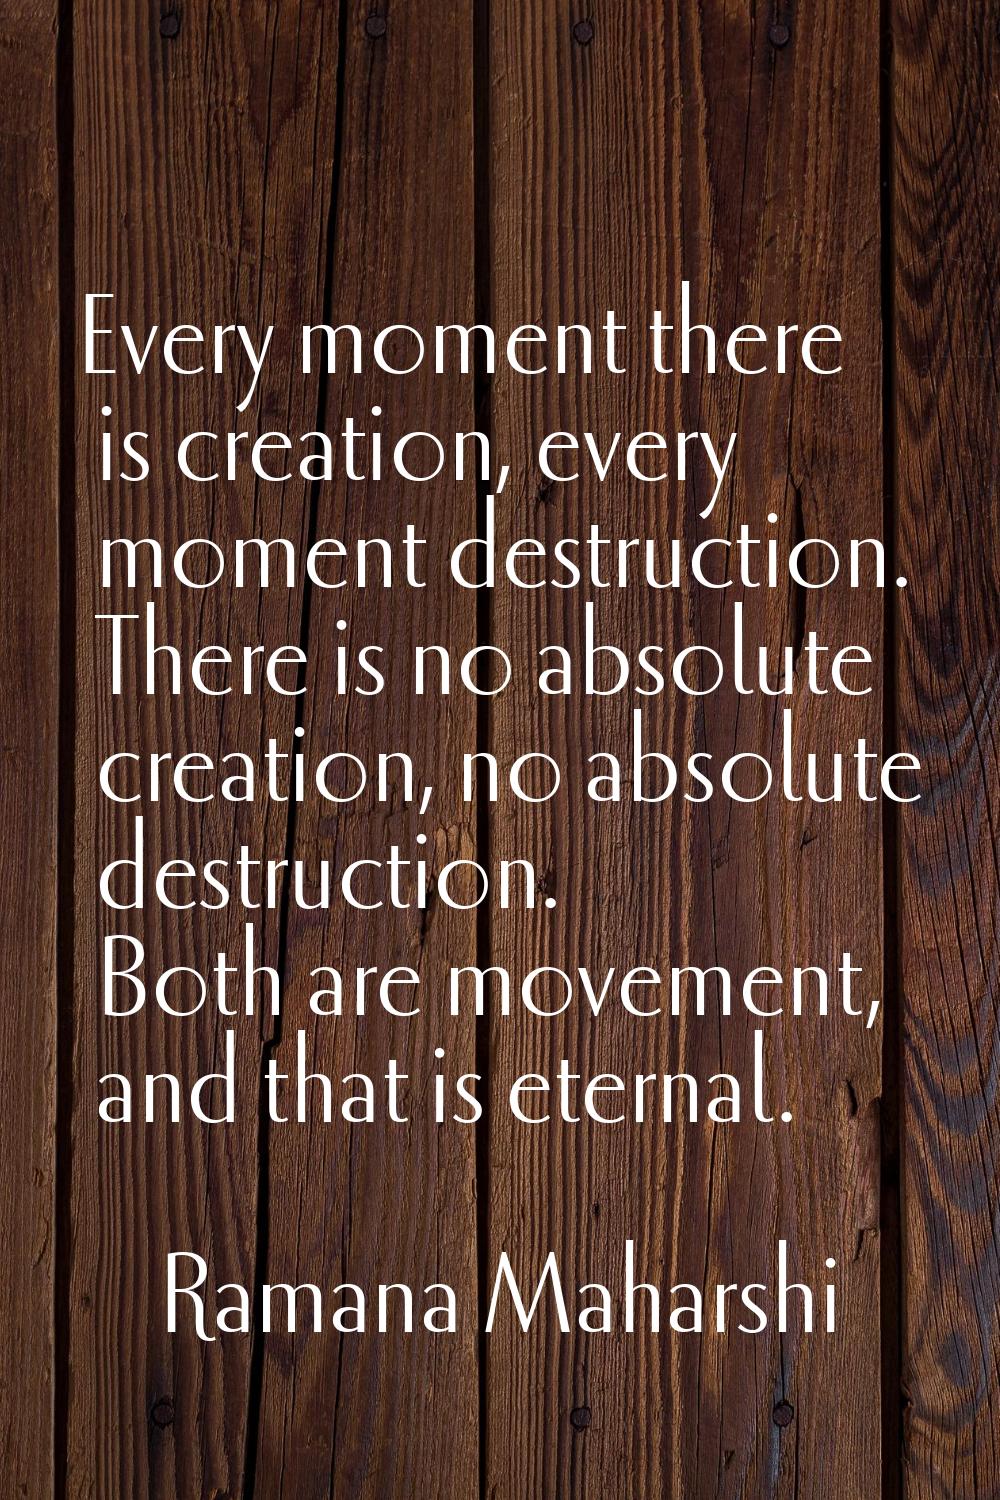 Every moment there is creation, every moment destruction. There is no absolute creation, no absolut